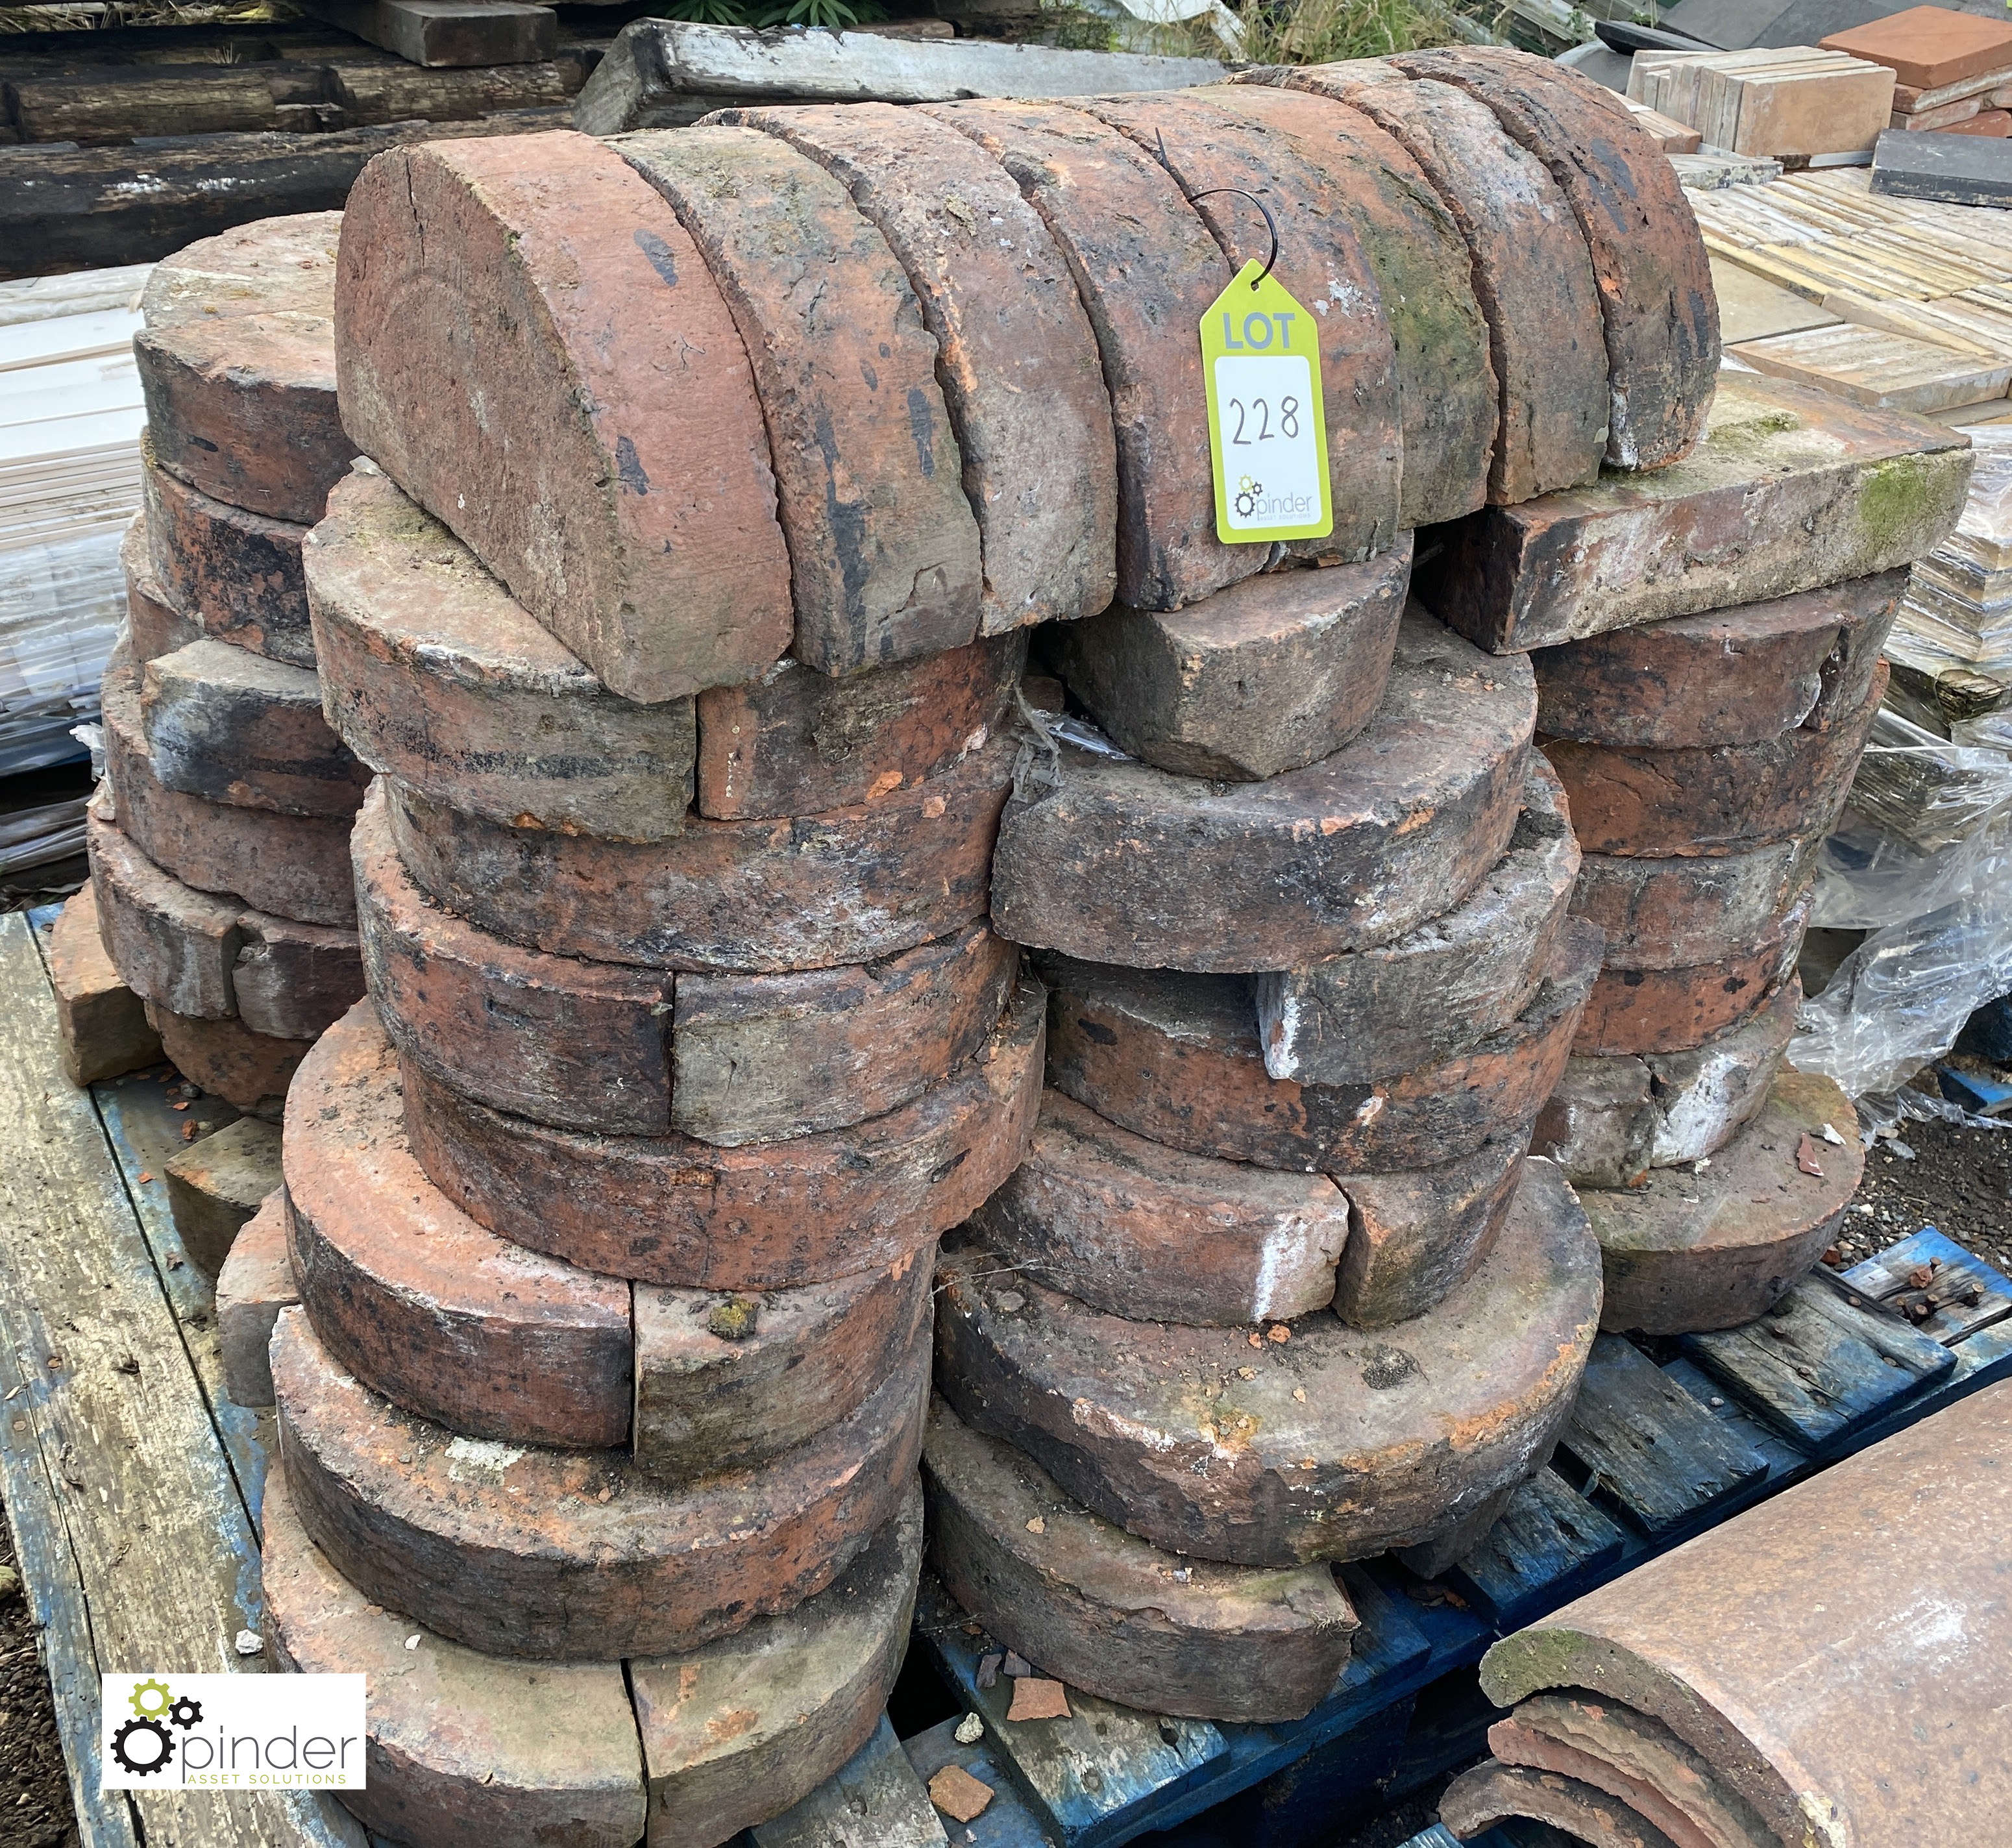 Approx. 85 reclaimed half round Coping Bricks, 7in high x 13in wide x 3in thick